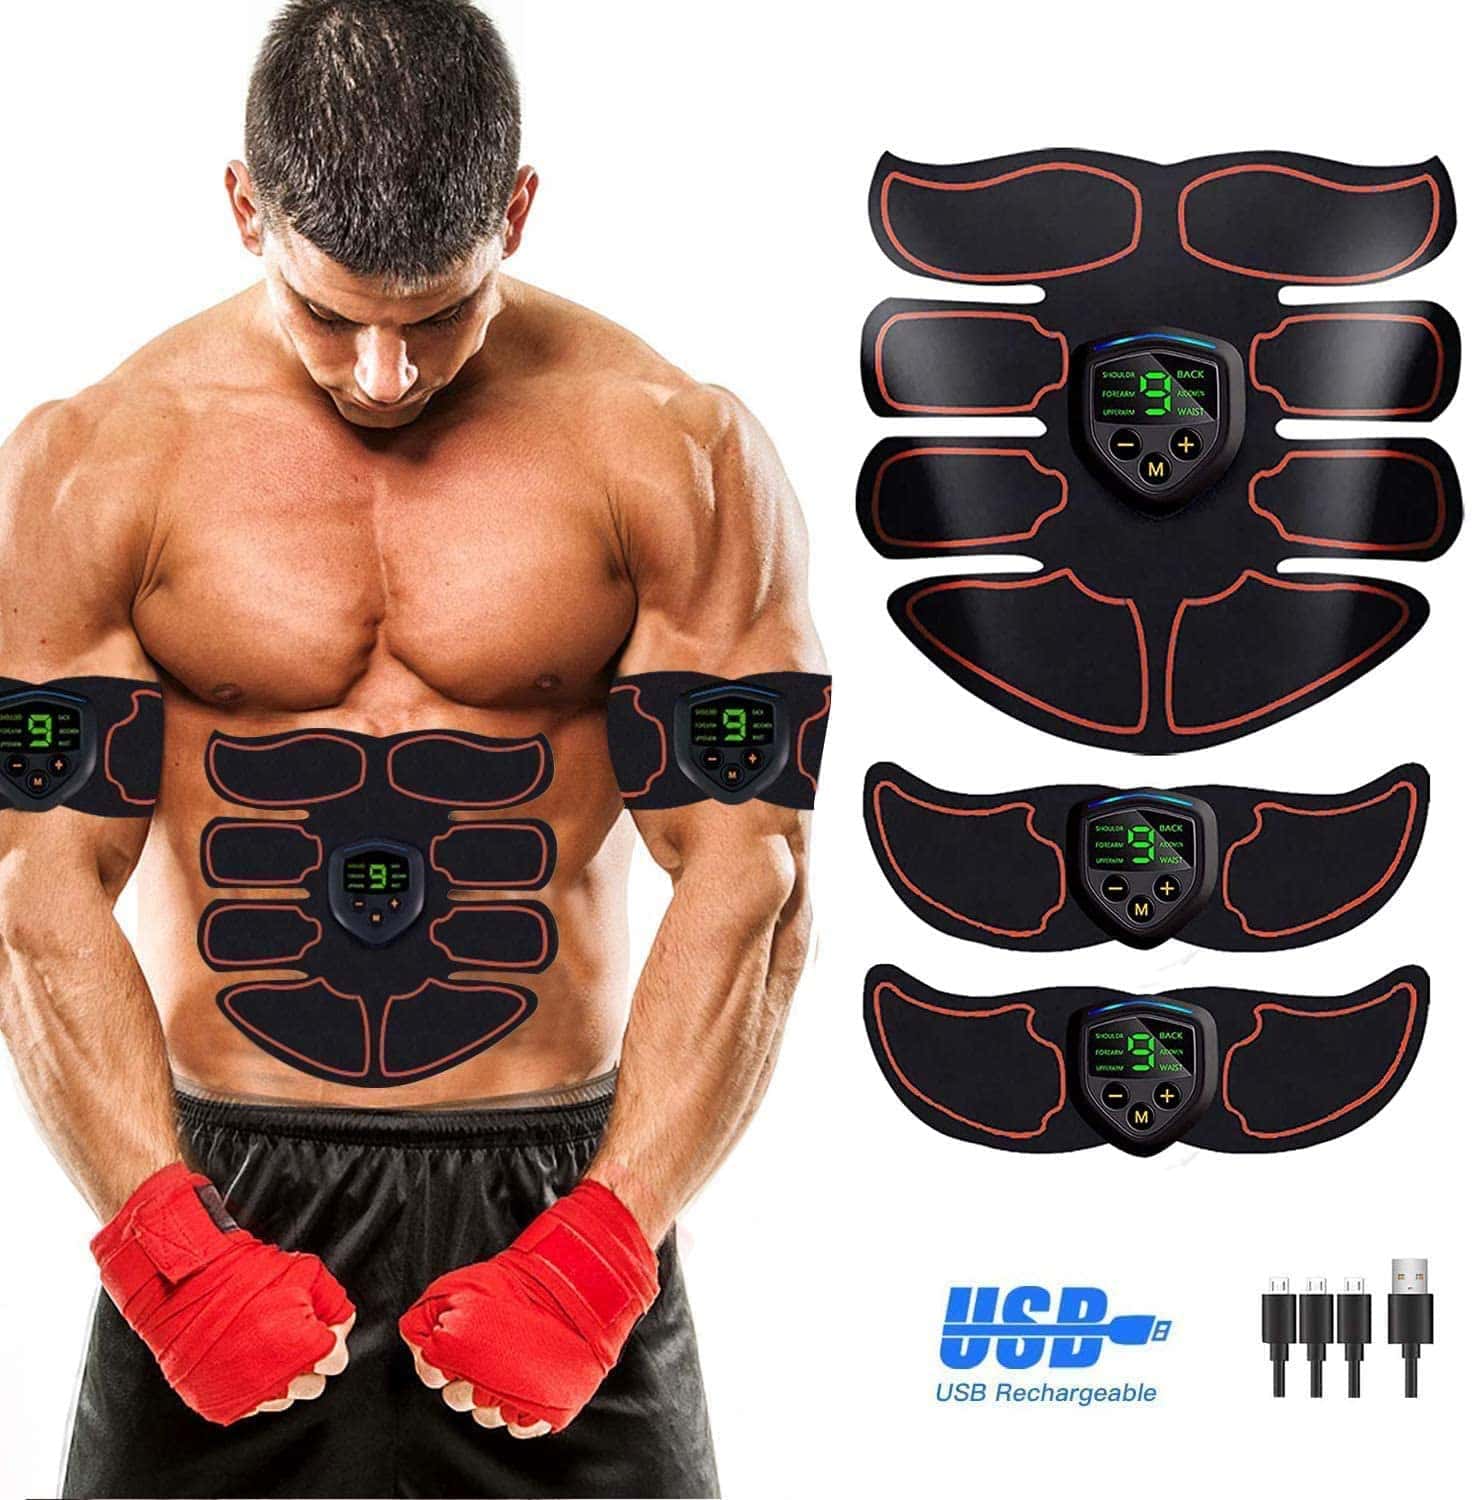 The Best Ab Stimulator Muscle Toning Abs Workout Abdominal Core Training Belt 